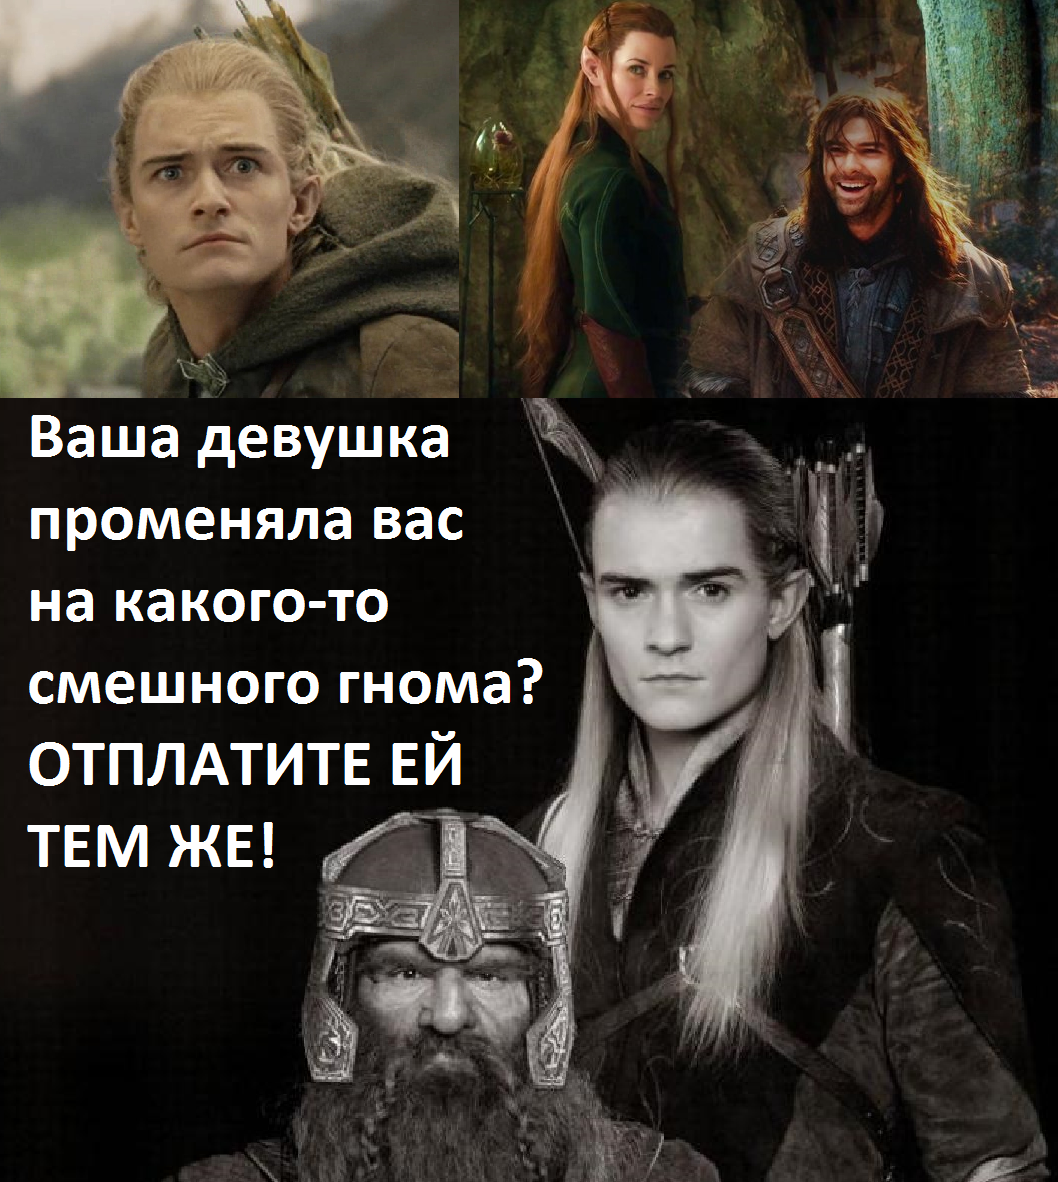 How to respond to cheating - Lord of the Rings, Legolas, Tauriel, Keeley, Gimli, Revenge, The hobbit, Peter Jackson